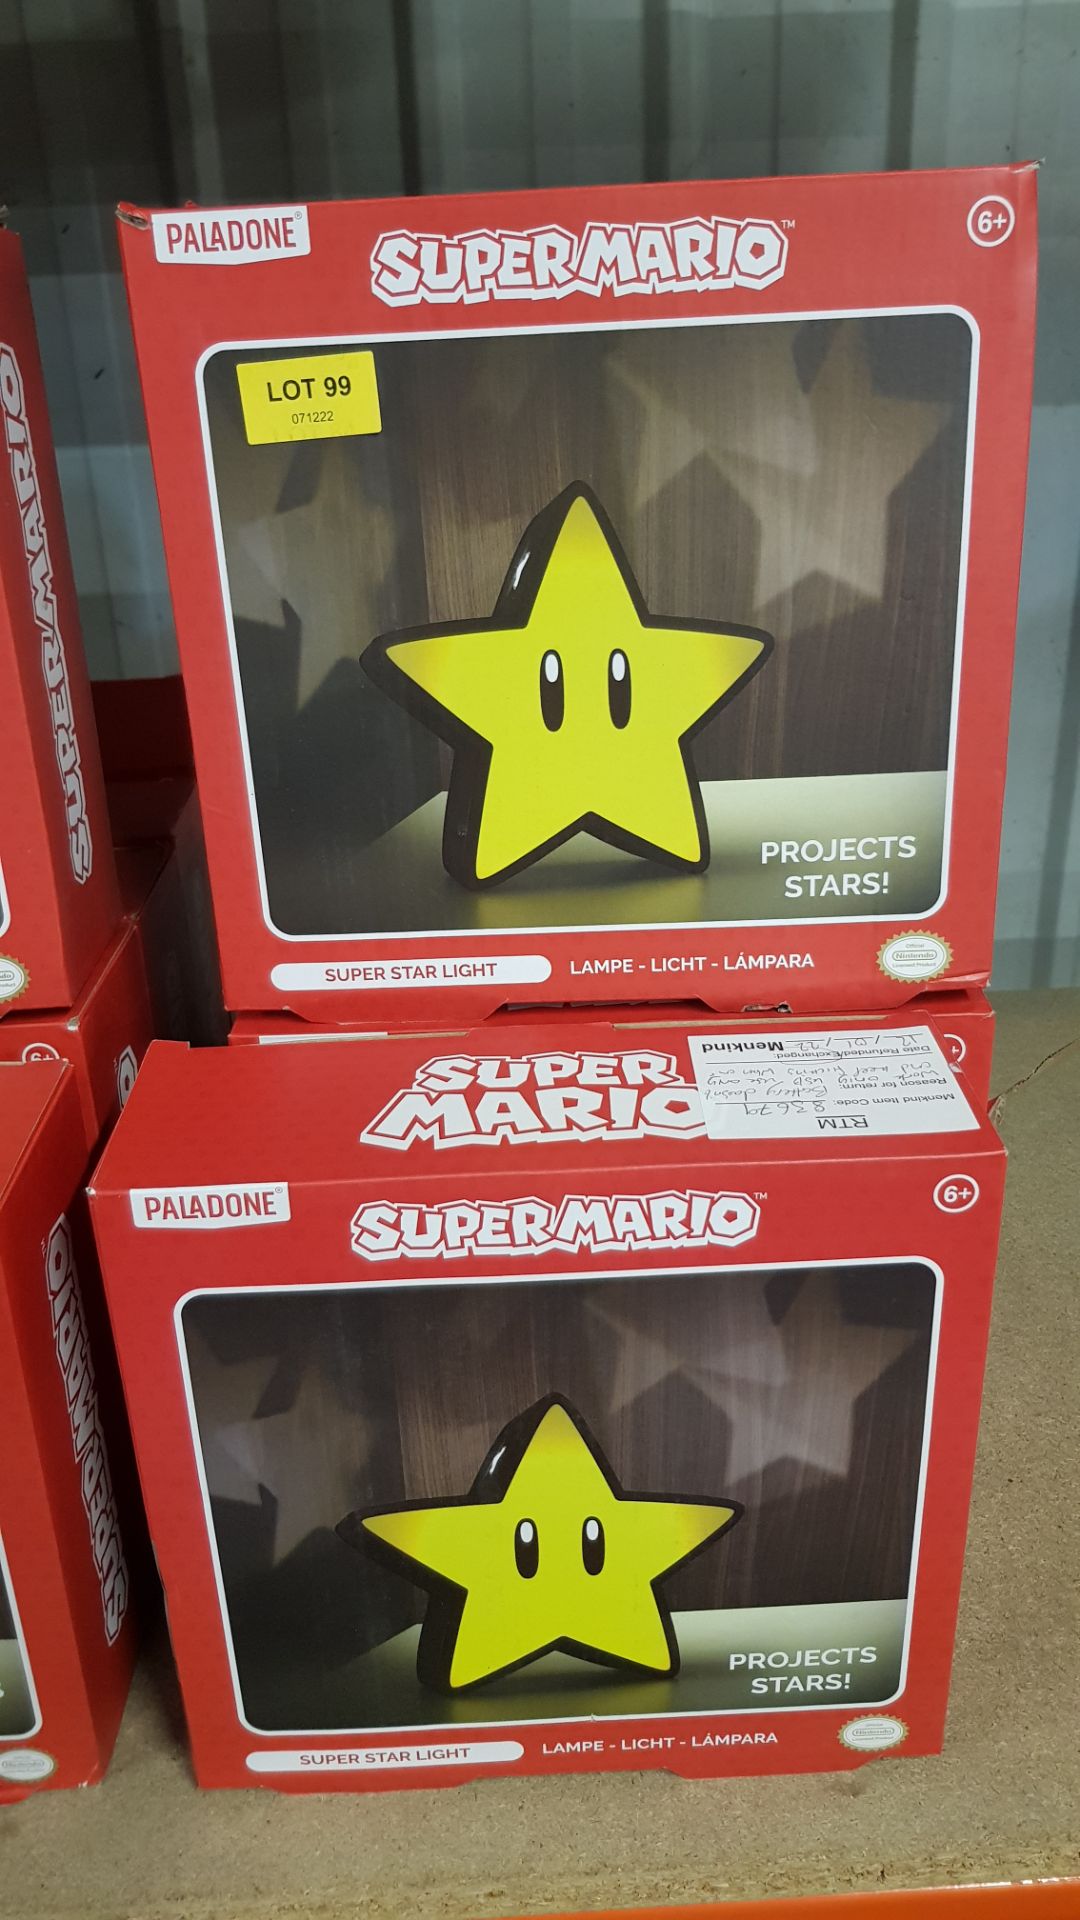 Title: (99/11C) Lot RRP £1506x Paladone Super Mario Super Star Light With Projection RRP £25 - Image 4 of 4